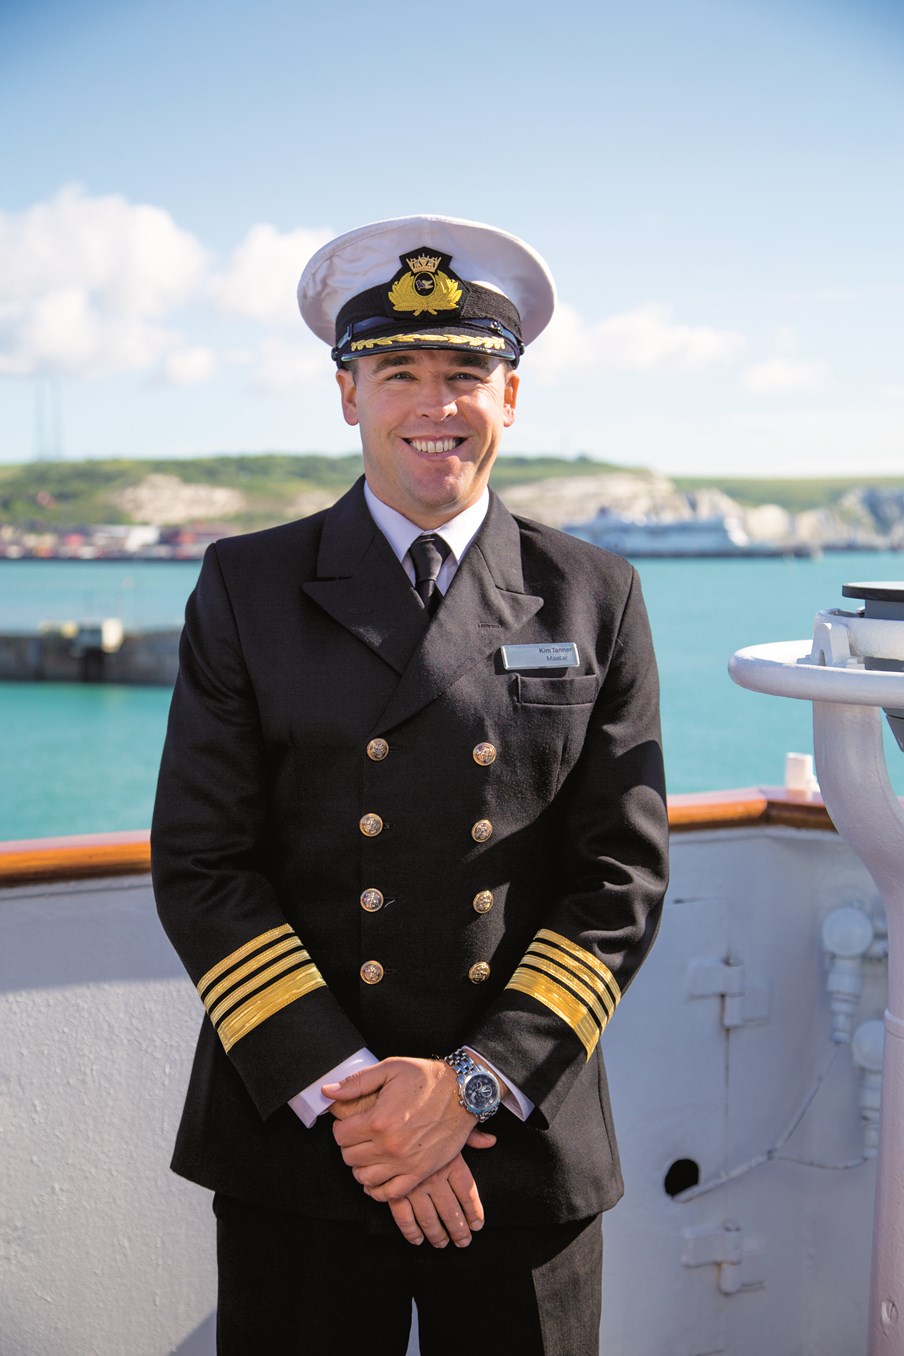 Captain Kim Tanner: Kim Tanner is one of Saga Cruises' Captains who joined the company in 2016